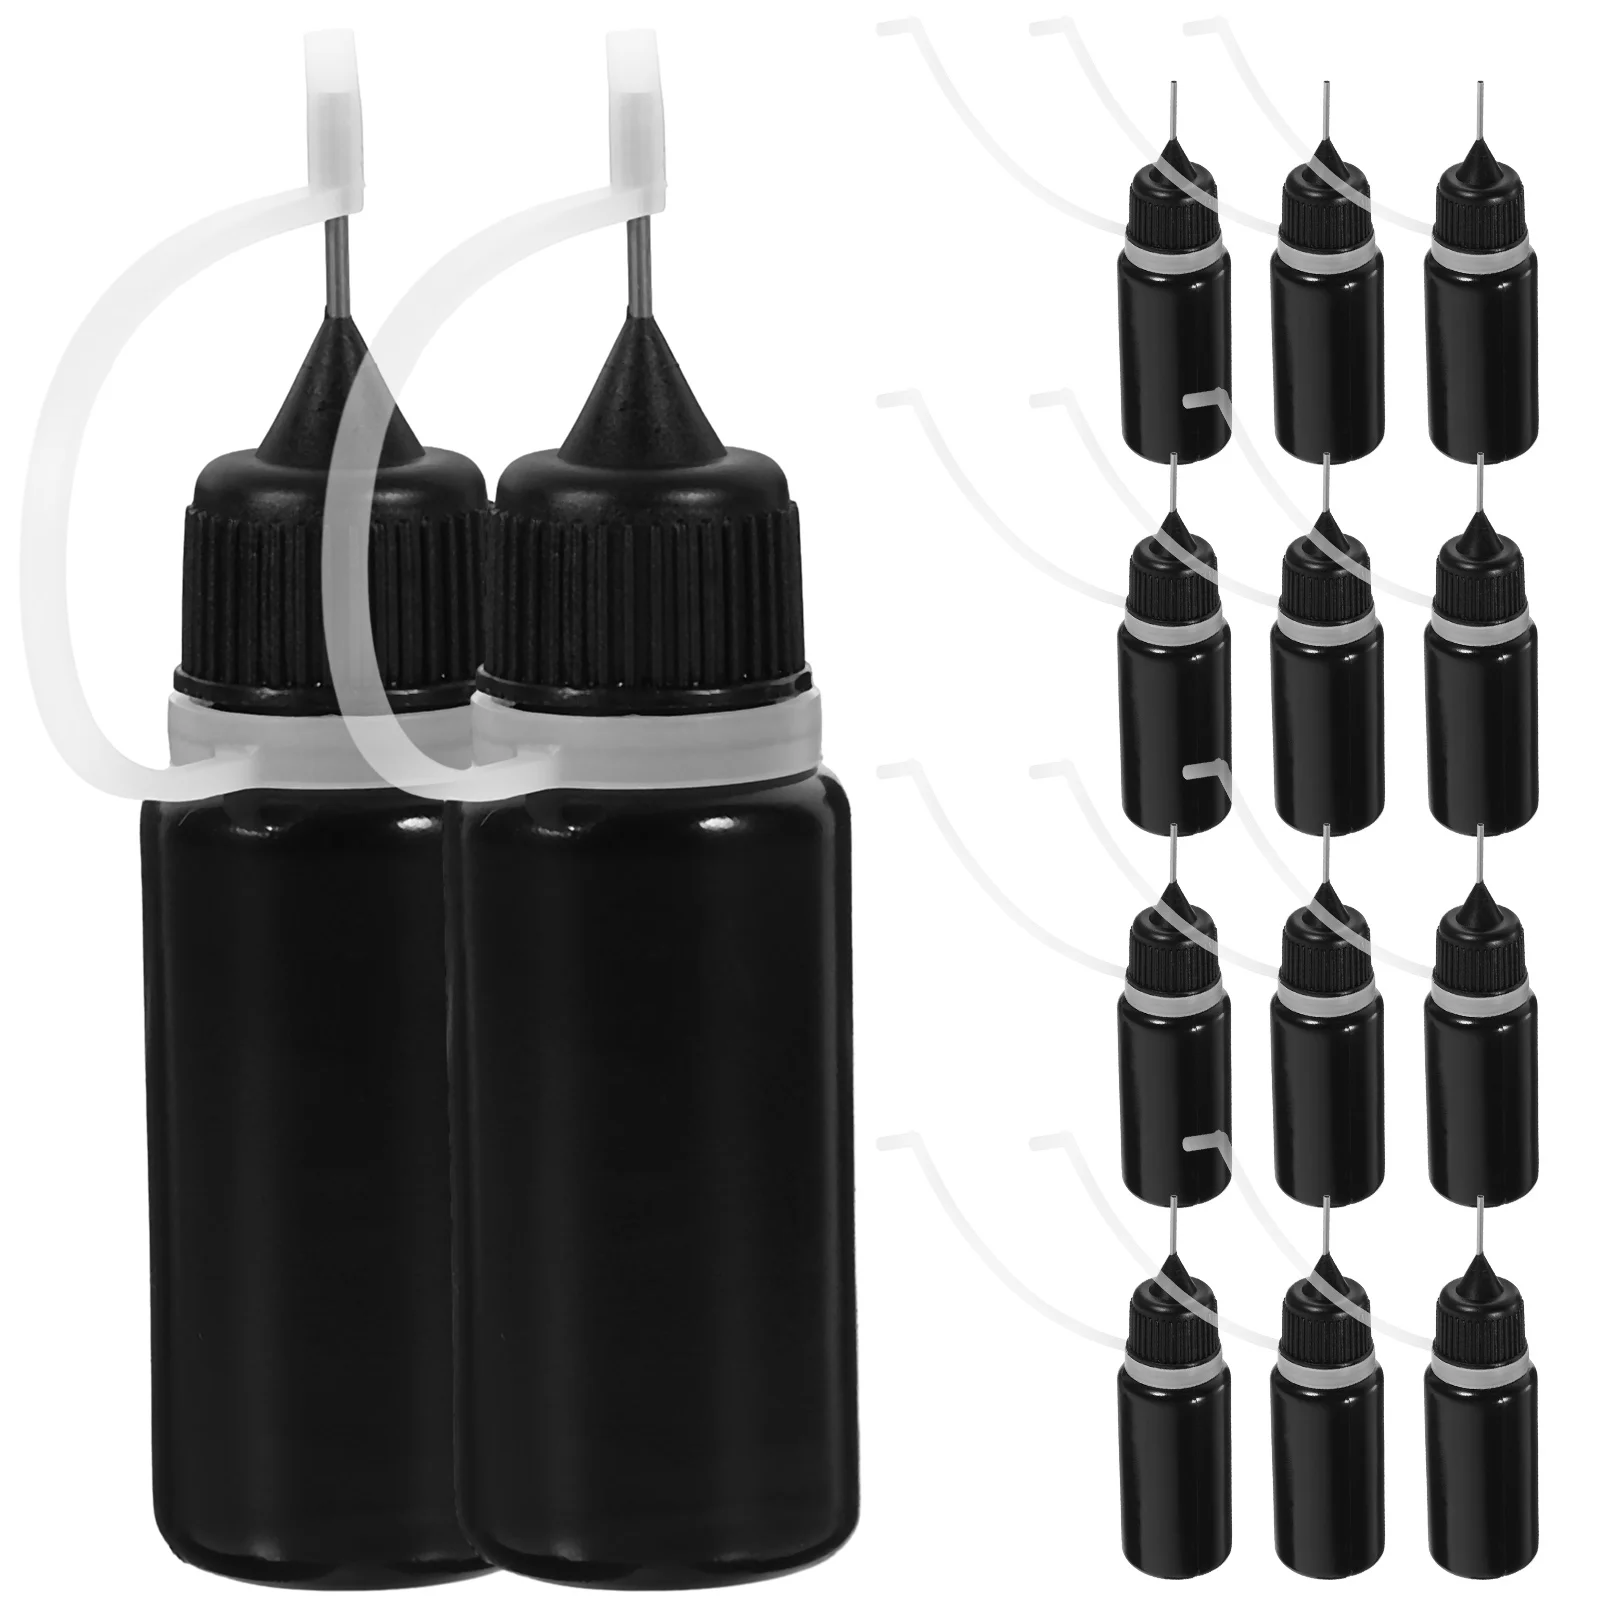 20 Pcs Bottled Squeeze Bottles Glue with Fine Tip for Liquids Needle Small Stainless Steel Precision Applicator Dispenser china flowmeter supplier dn25 paddle wheel sus flow sensor combined with transmitter rs485 liquids flow control 20 280lpm